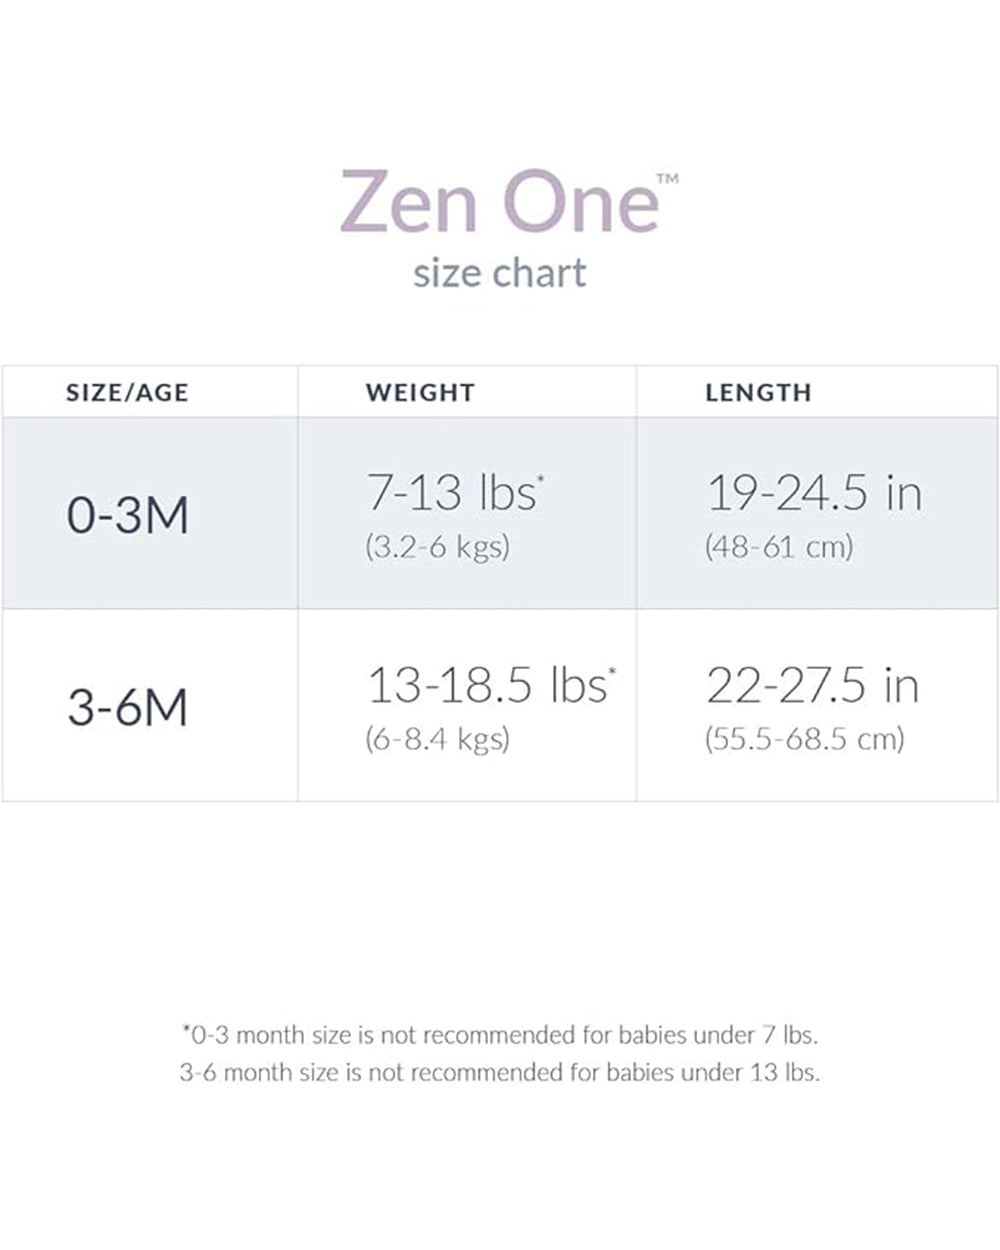 Nested Bean Zen One Baby Swaddle New Born 0-3 Month 7-13lb